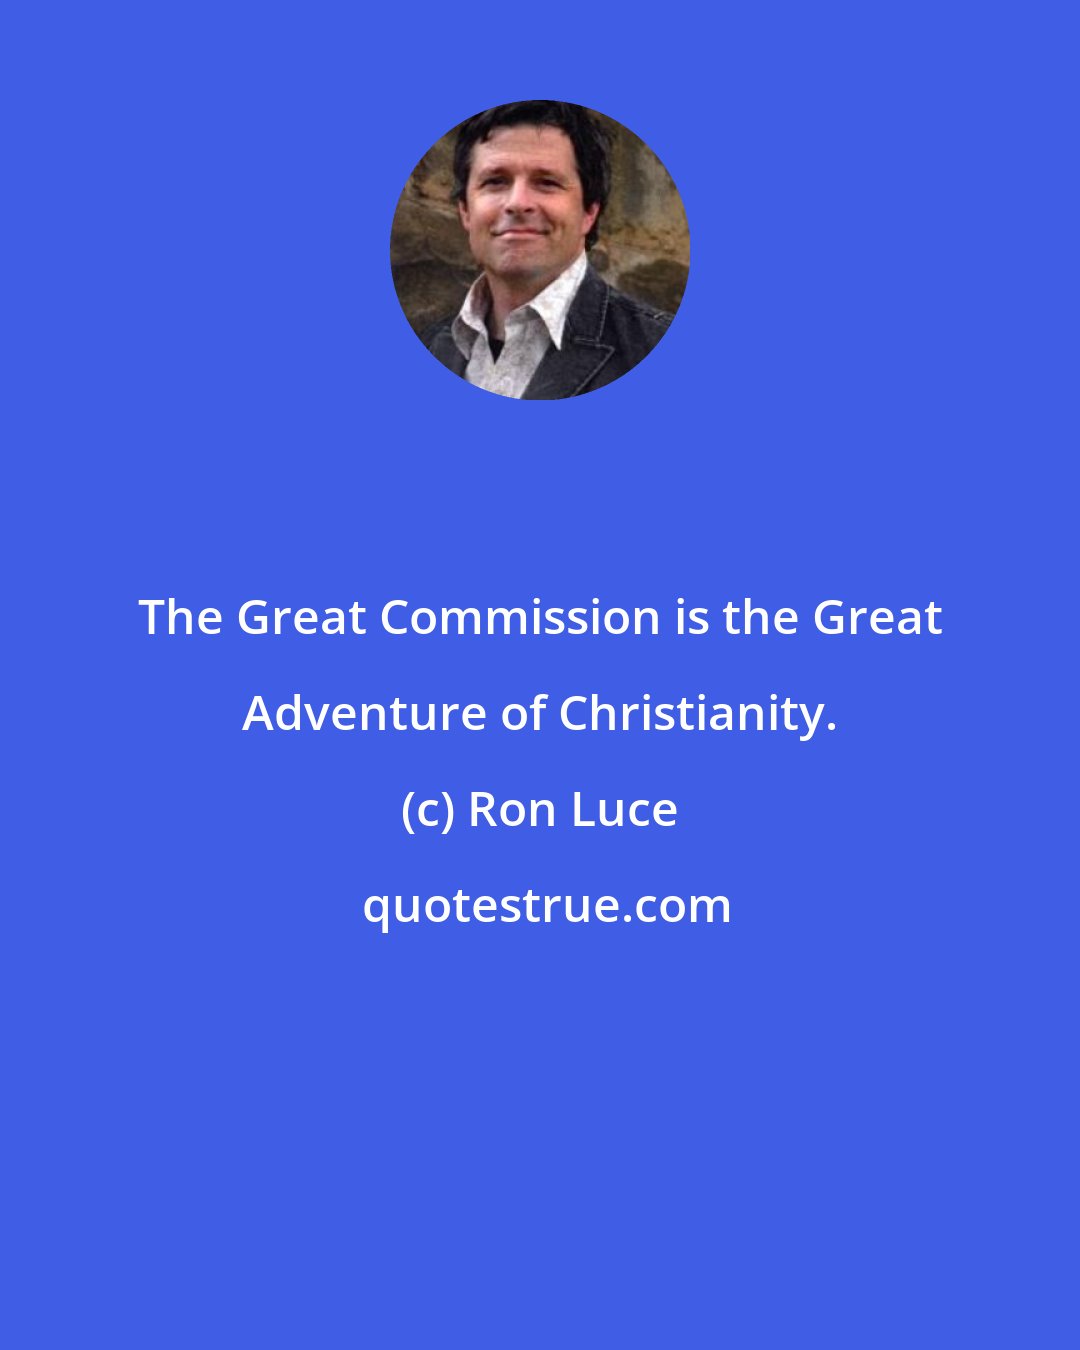 Ron Luce: The Great Commission is the Great Adventure of Christianity.